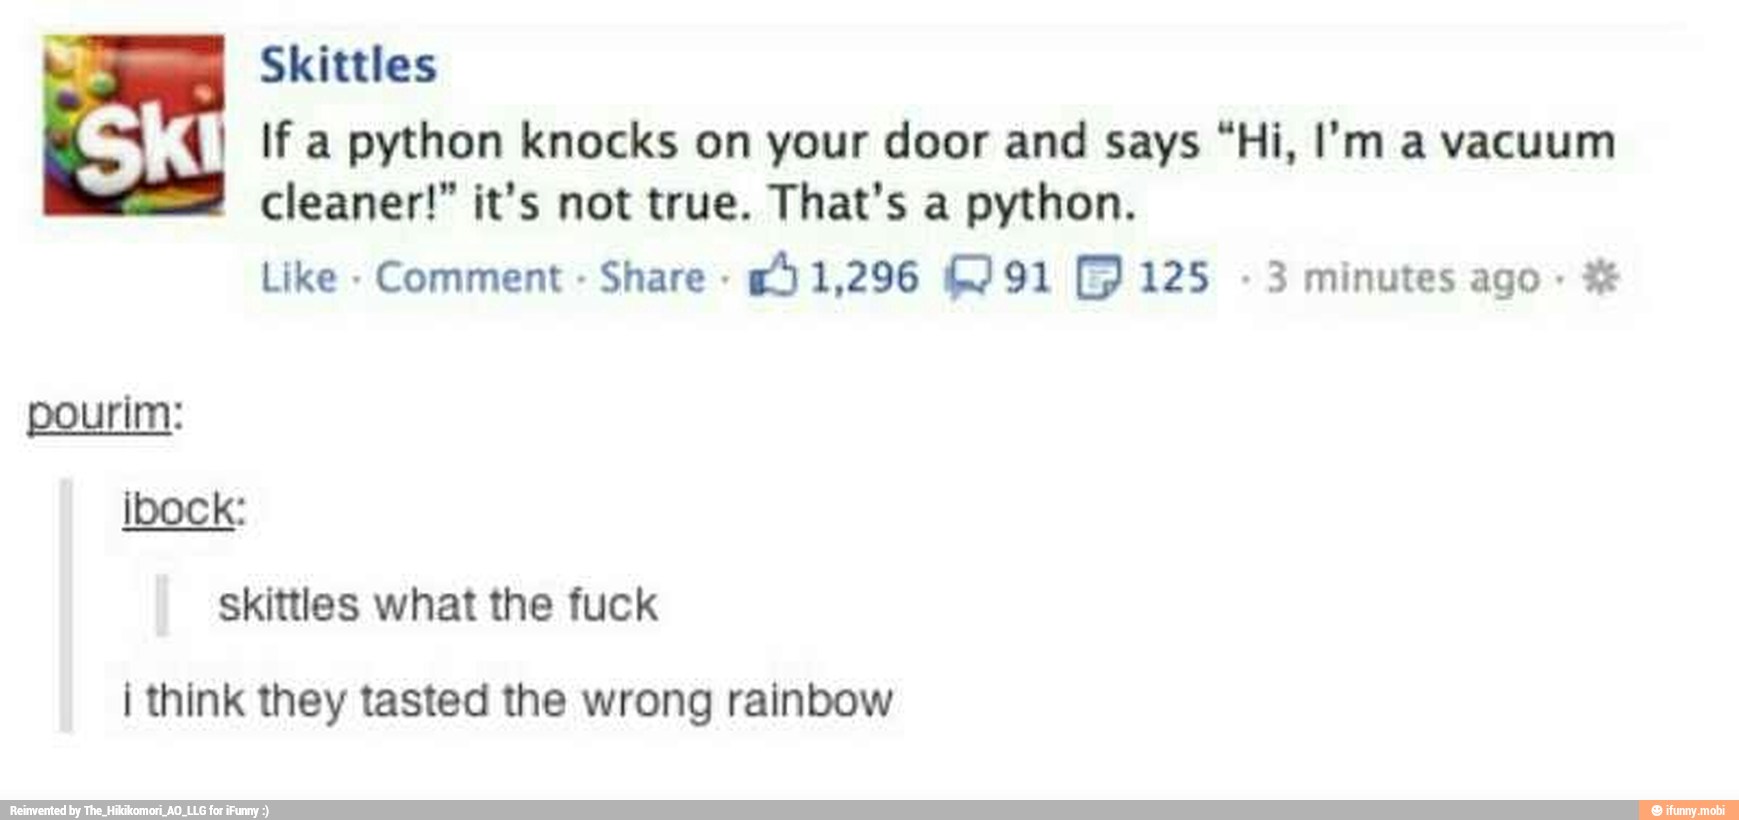 Skittles I If a python knocks on your door and says "Hi, I'm a va...